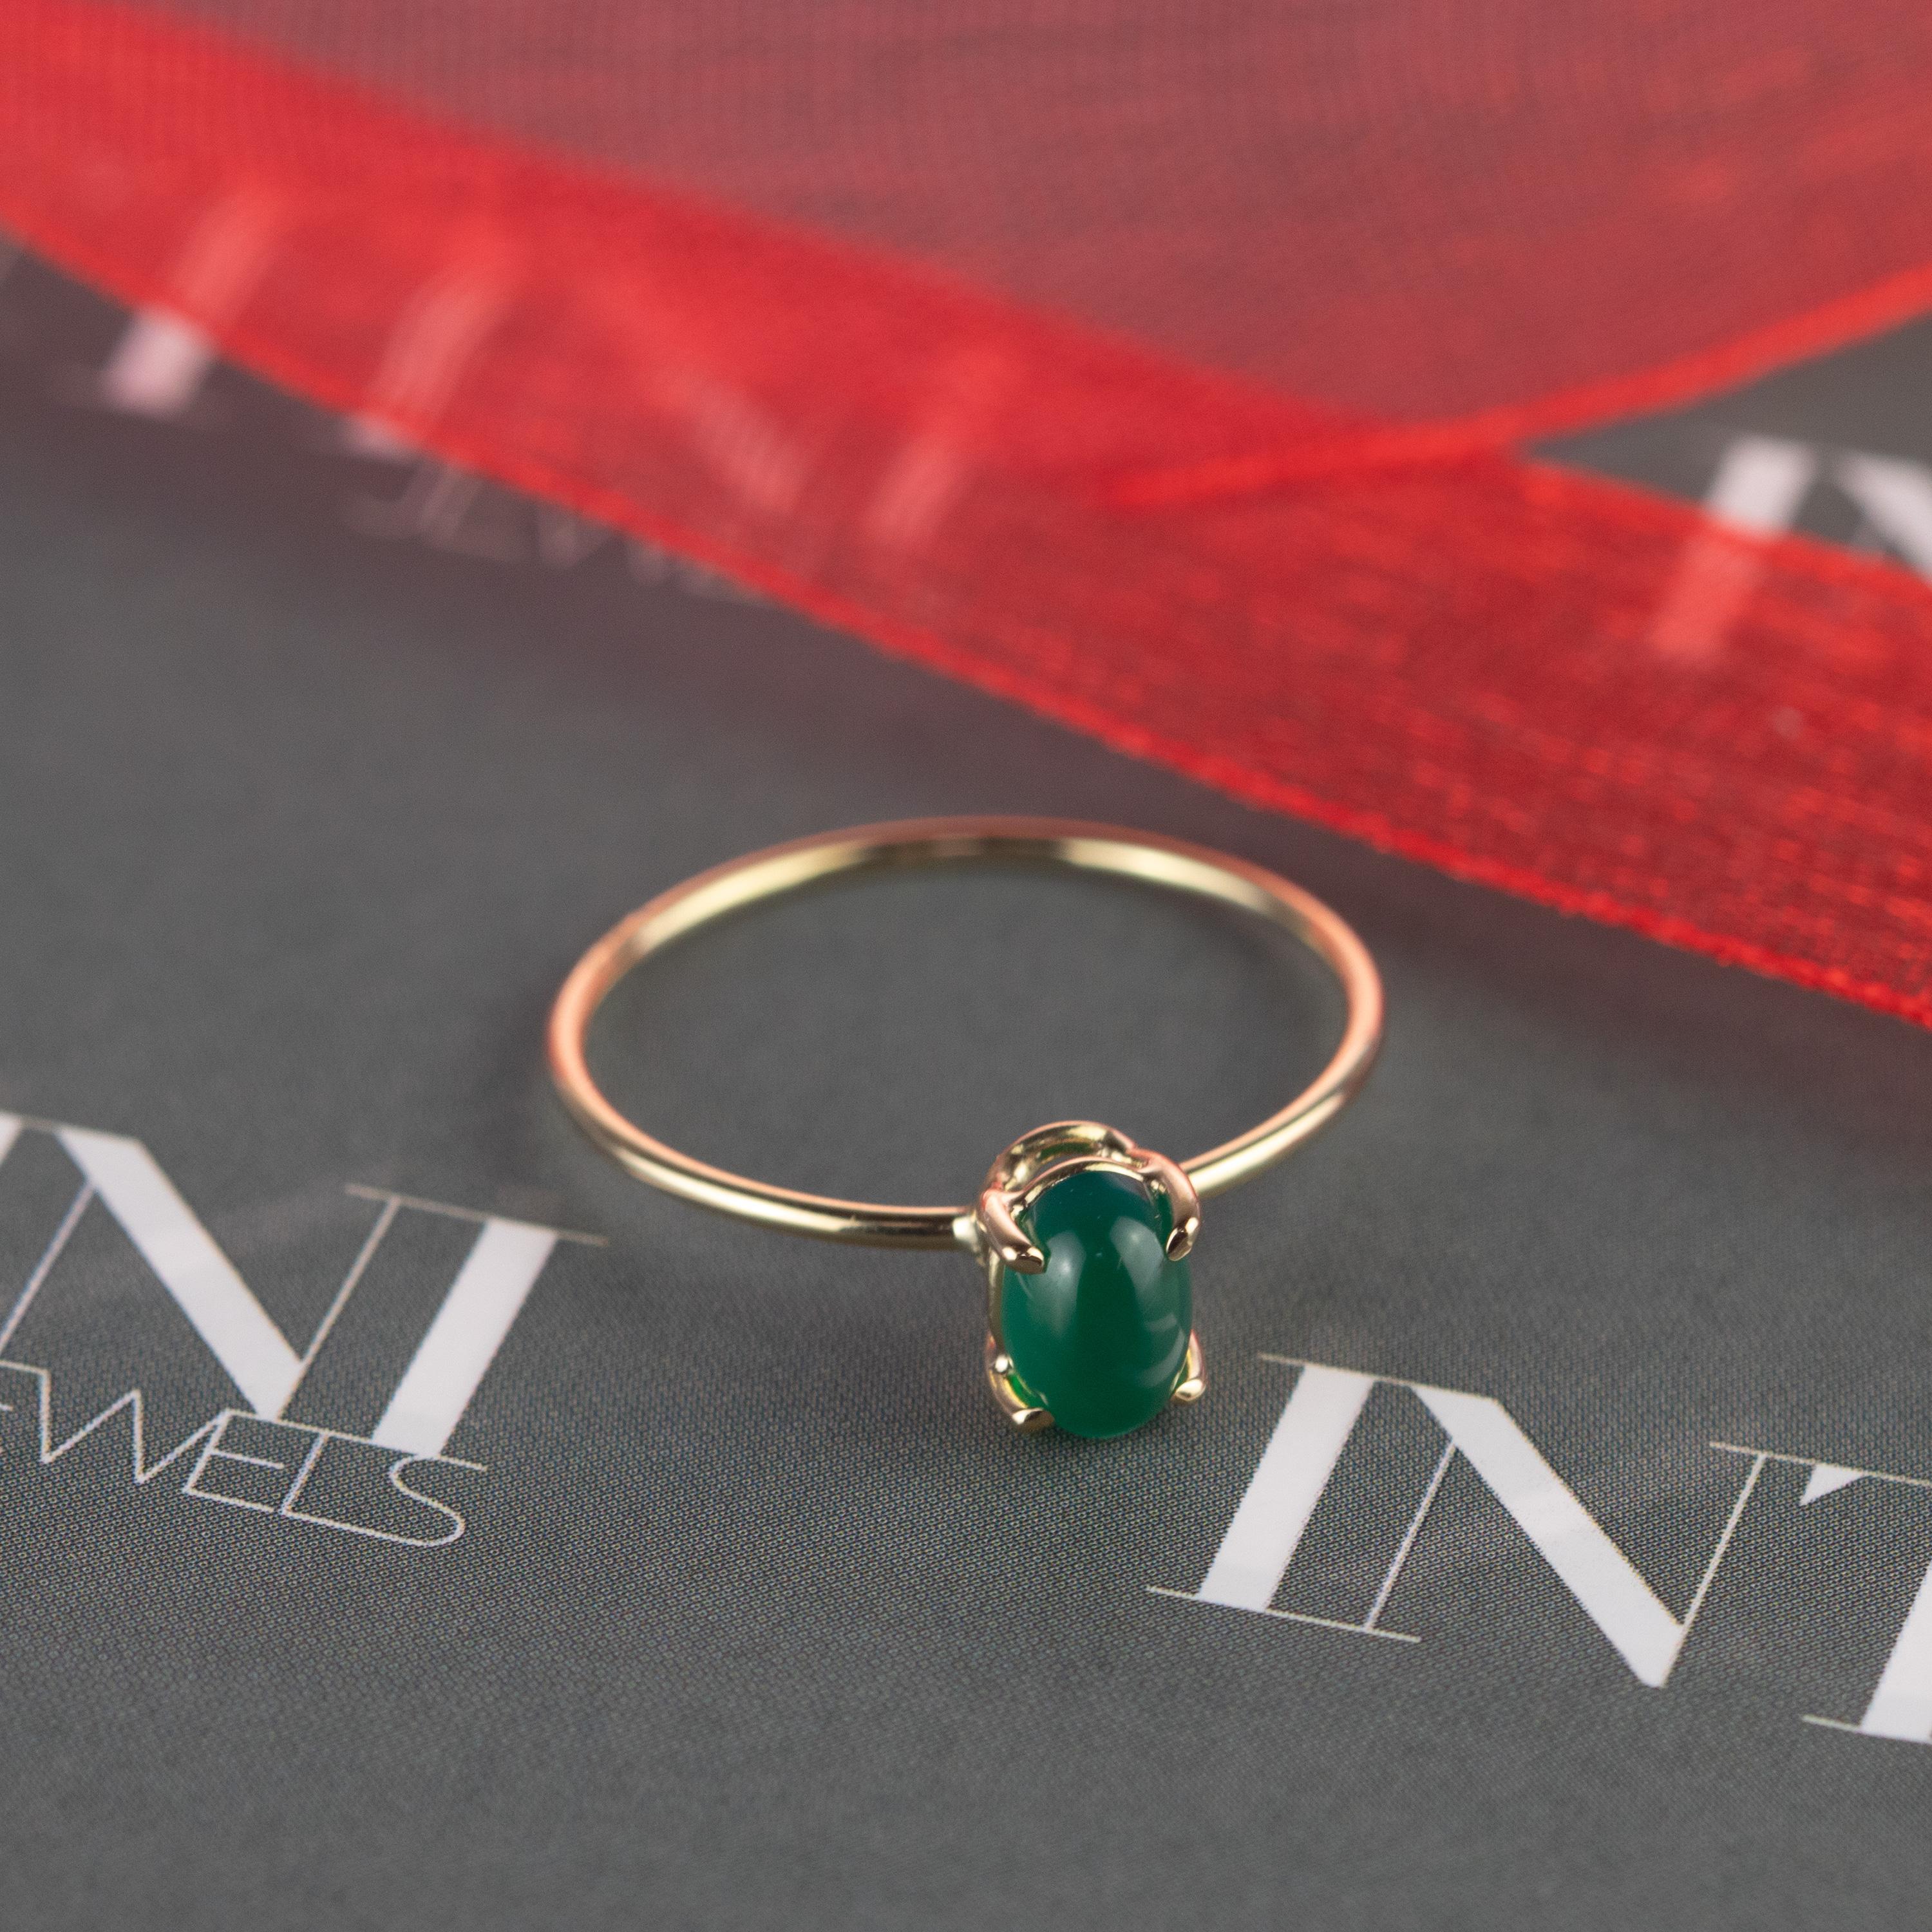 A stunning oval emerald ring, both enhanced by 9 karat yellow gold. This epic jewellery piece is an outstanding display of quality and Italian handmade royal craftsmanship. Create a fashionable look full of light and desire. This ring will embellish